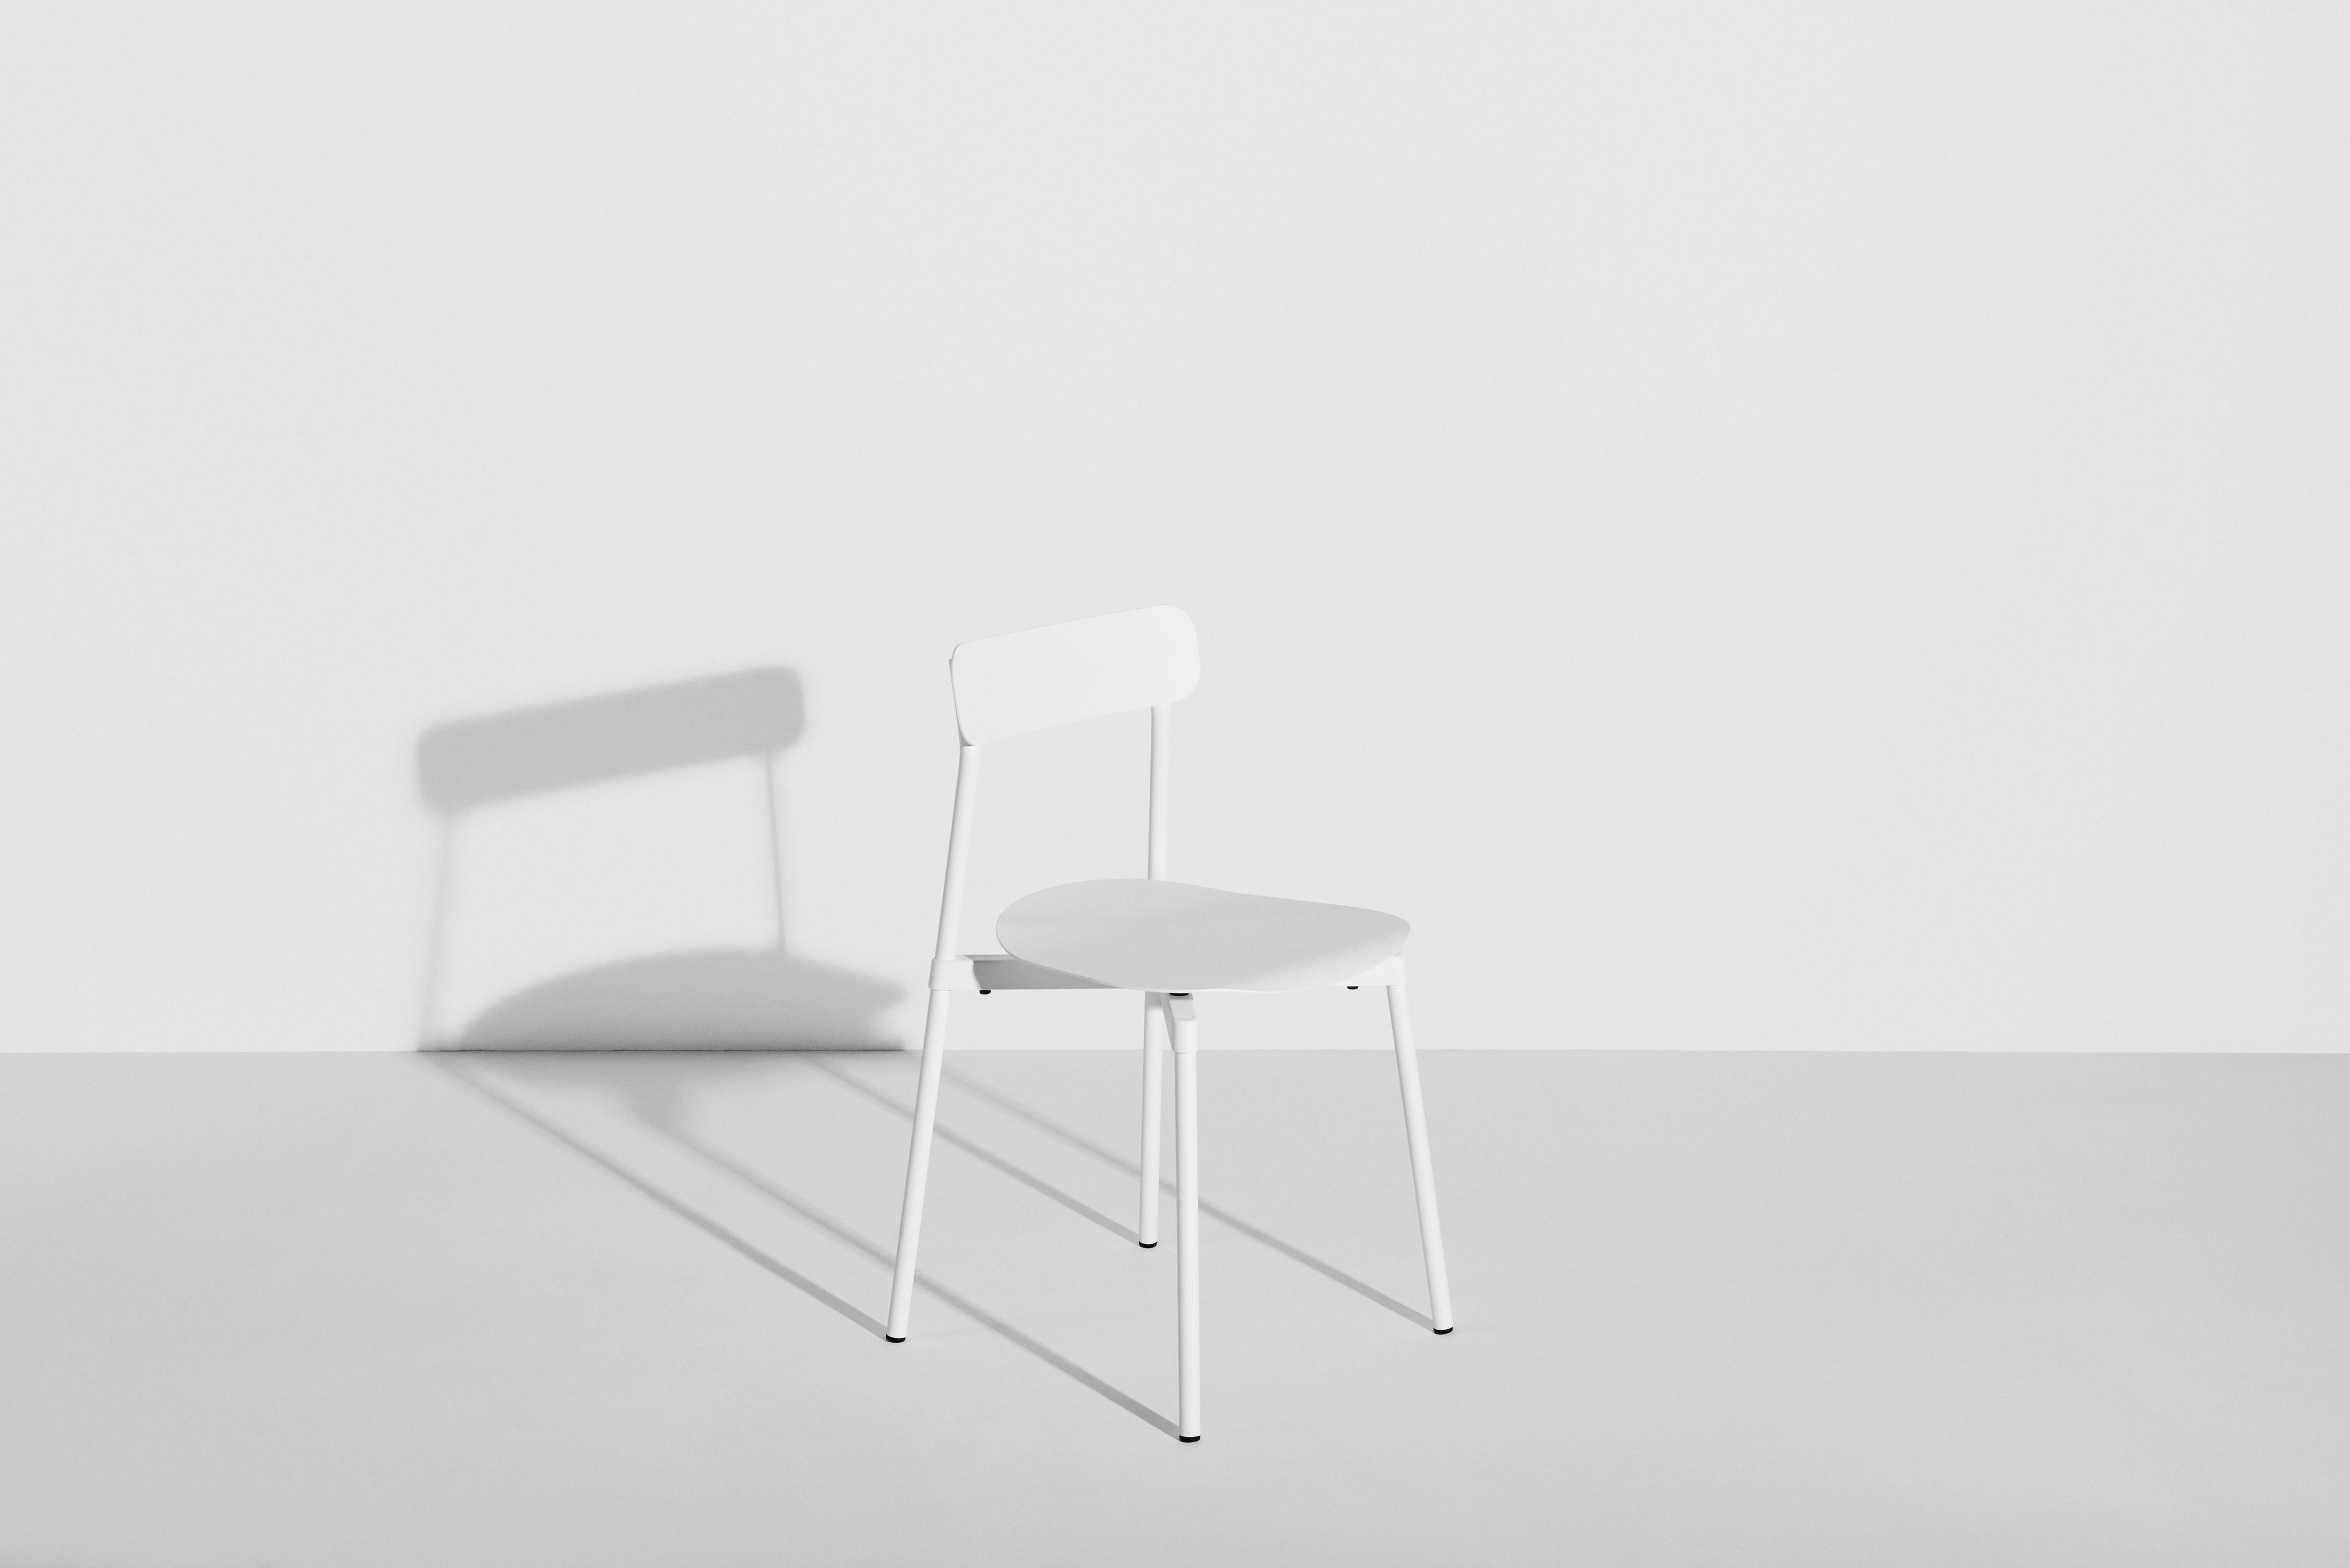 Chinese Petite Friture Fromme Chair in White Aluminium by Tom Chung, 2019 For Sale